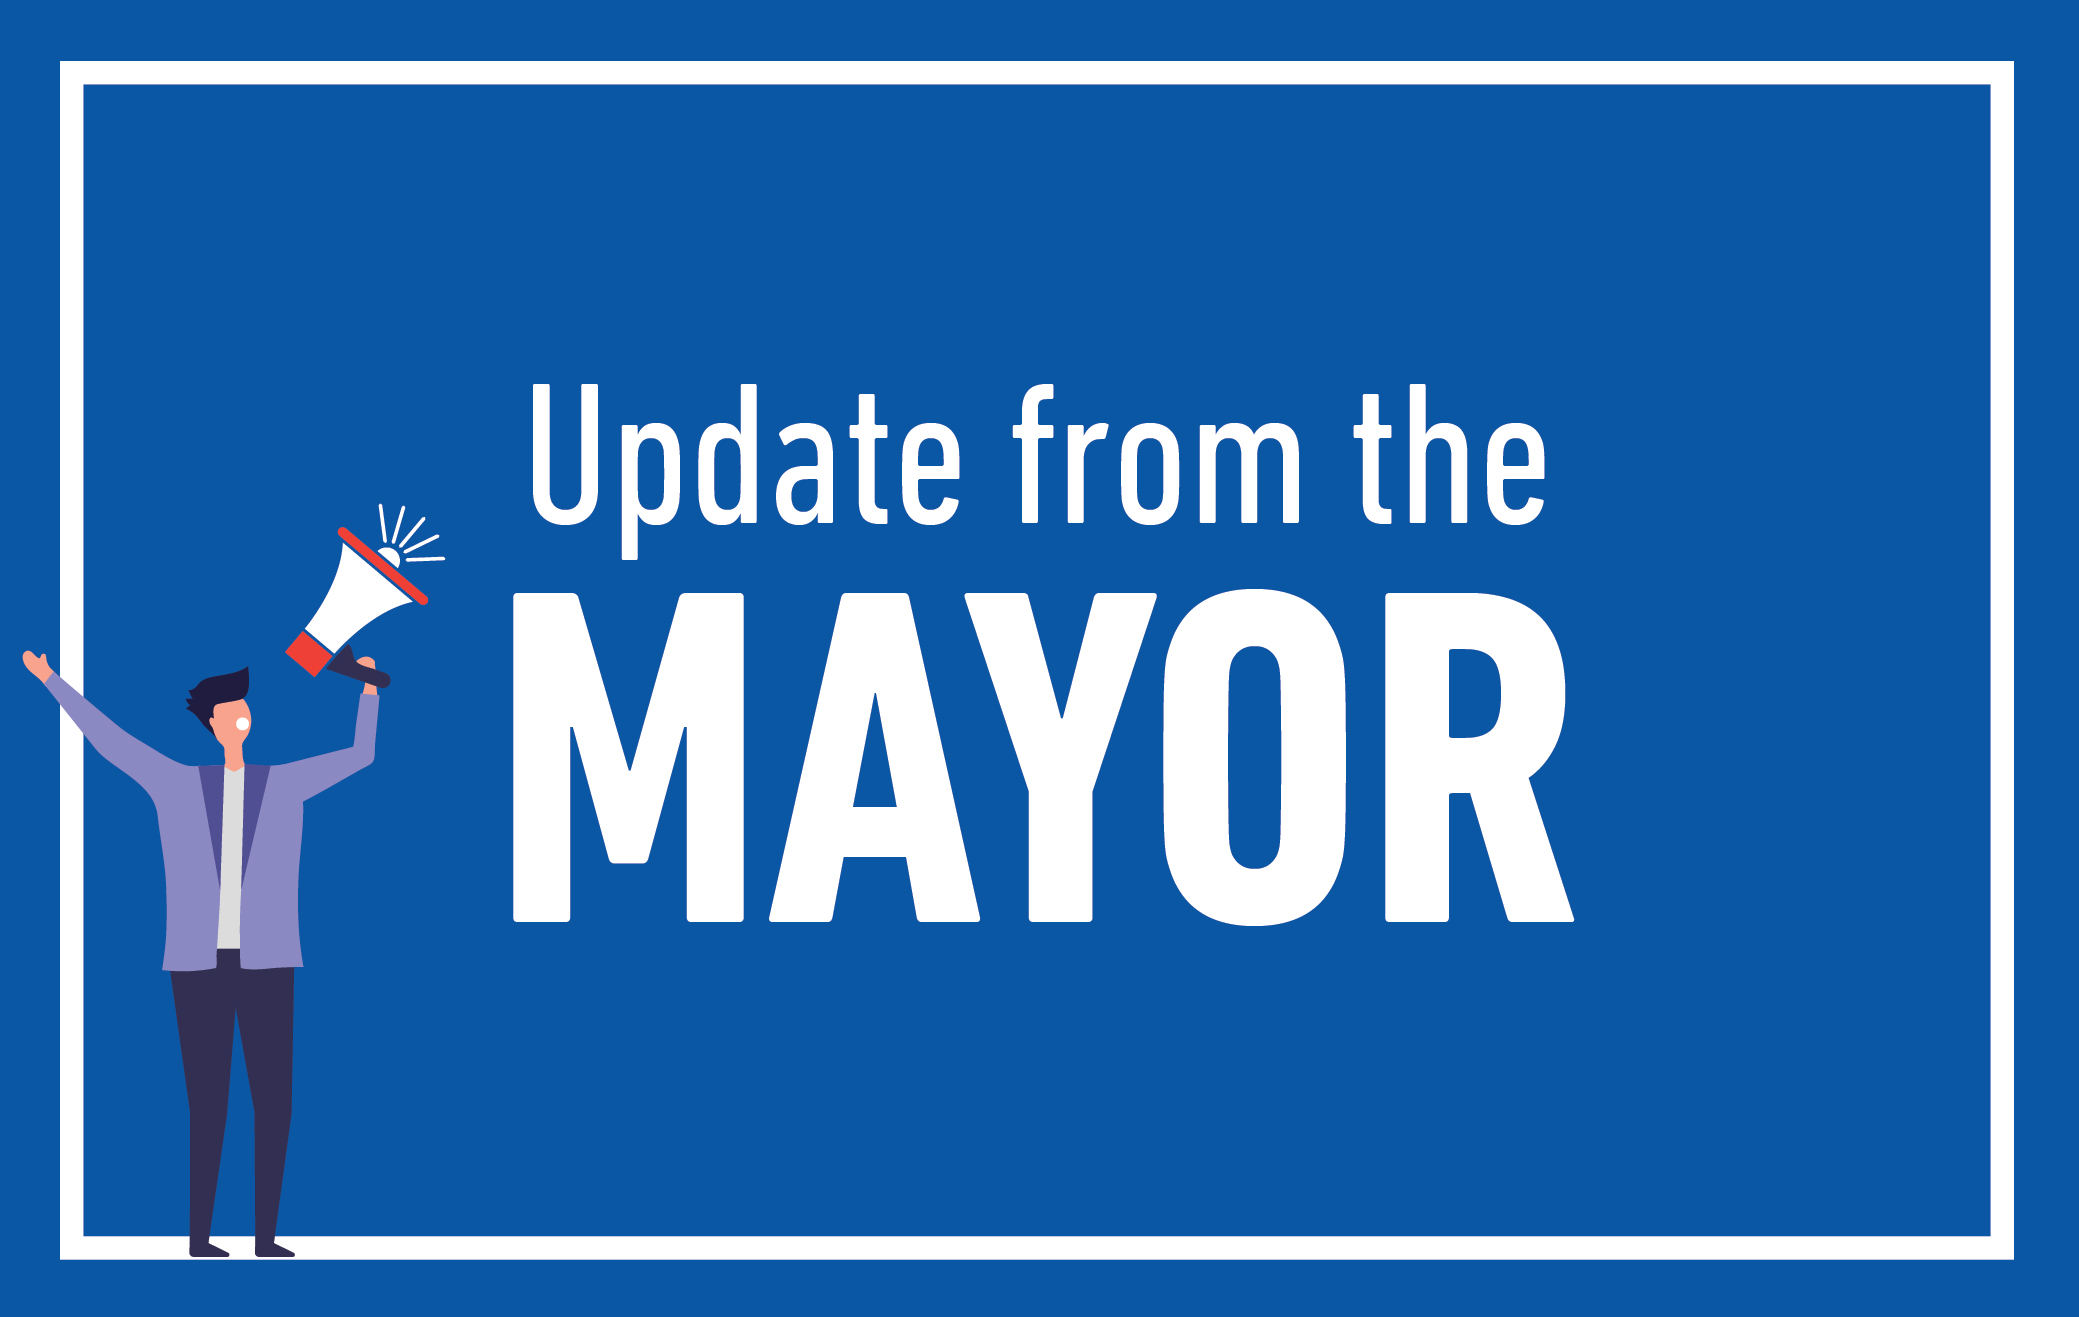 Update from the Mayor